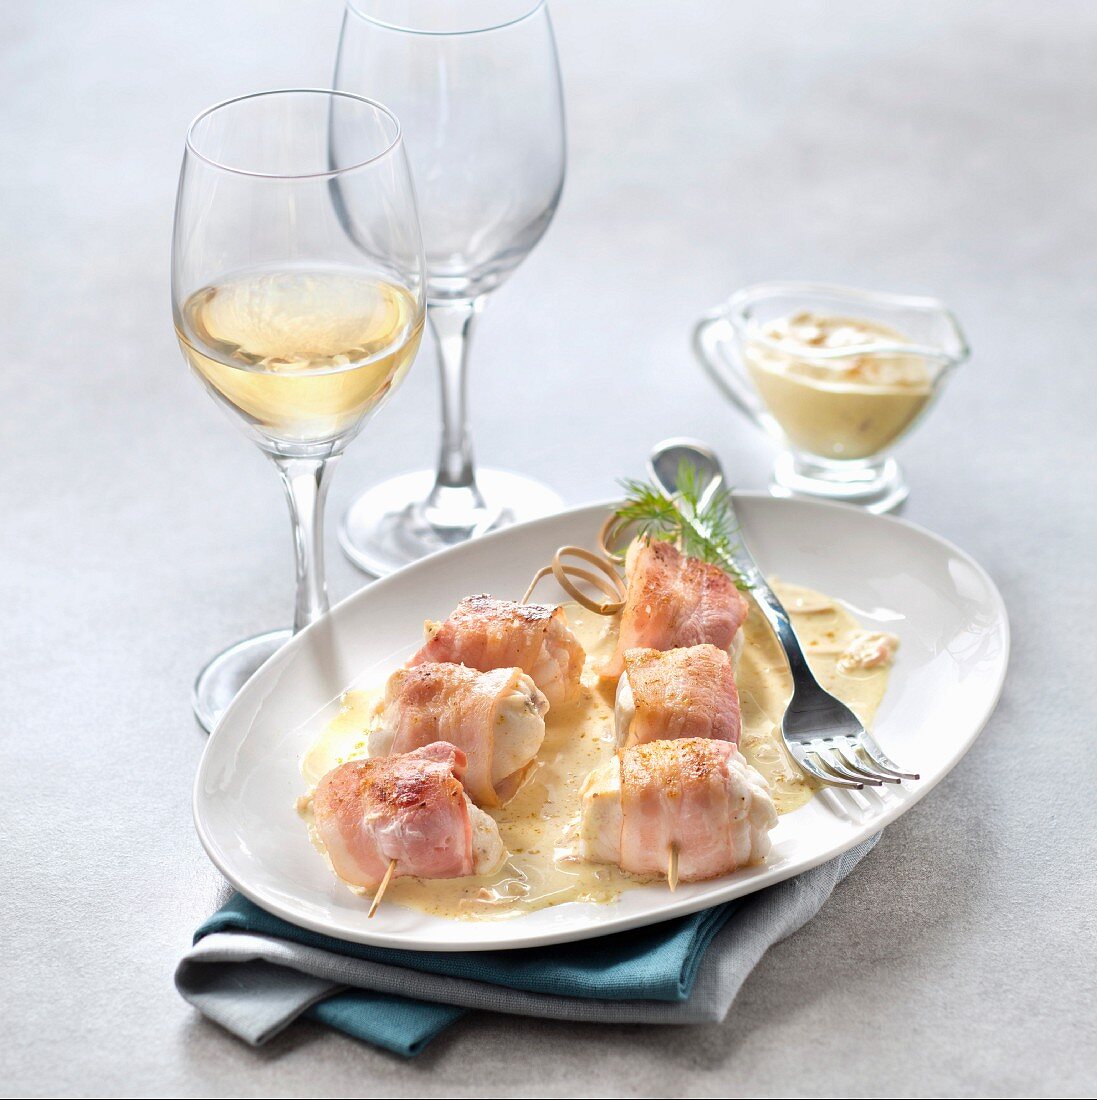 Fish skewer with smoked bacon and curry sauce, glass of white wine